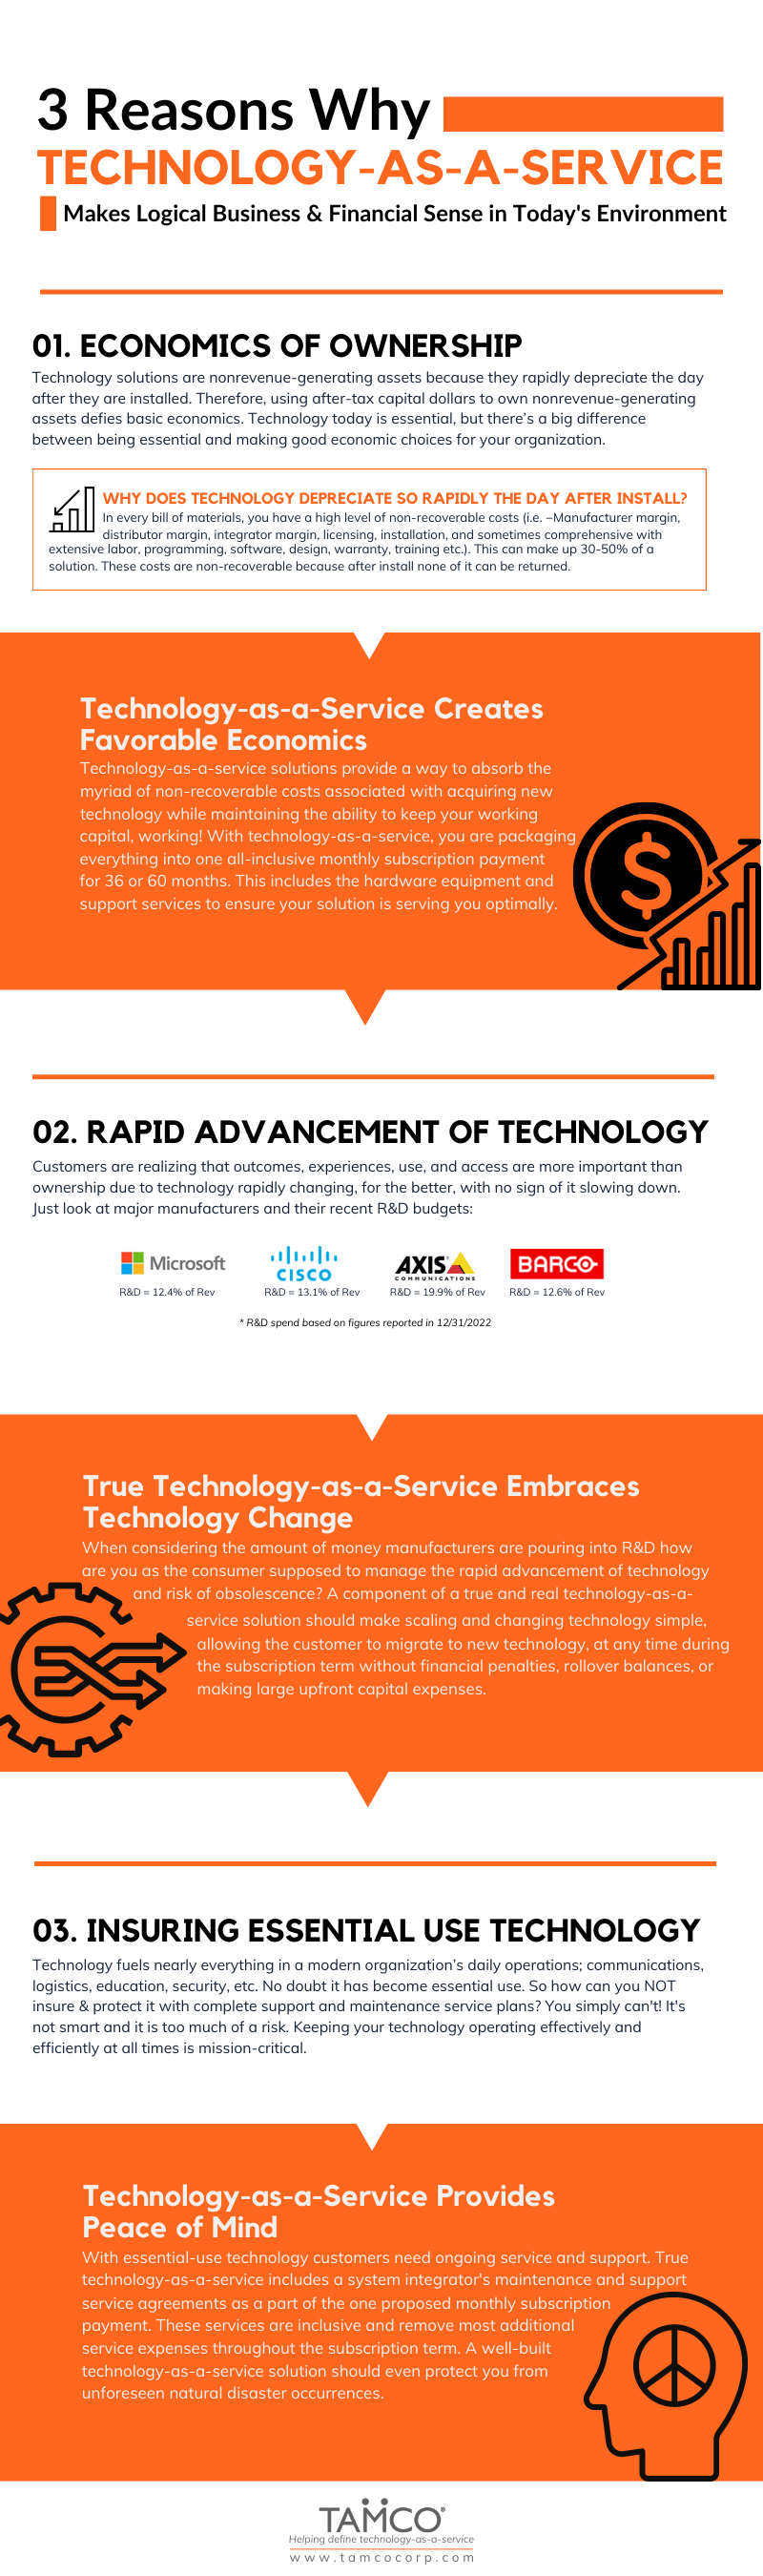 TAMCO Infographic - 3 Reasons Why Tech as a Service Makes Logical Business and Financial Sense in Todays